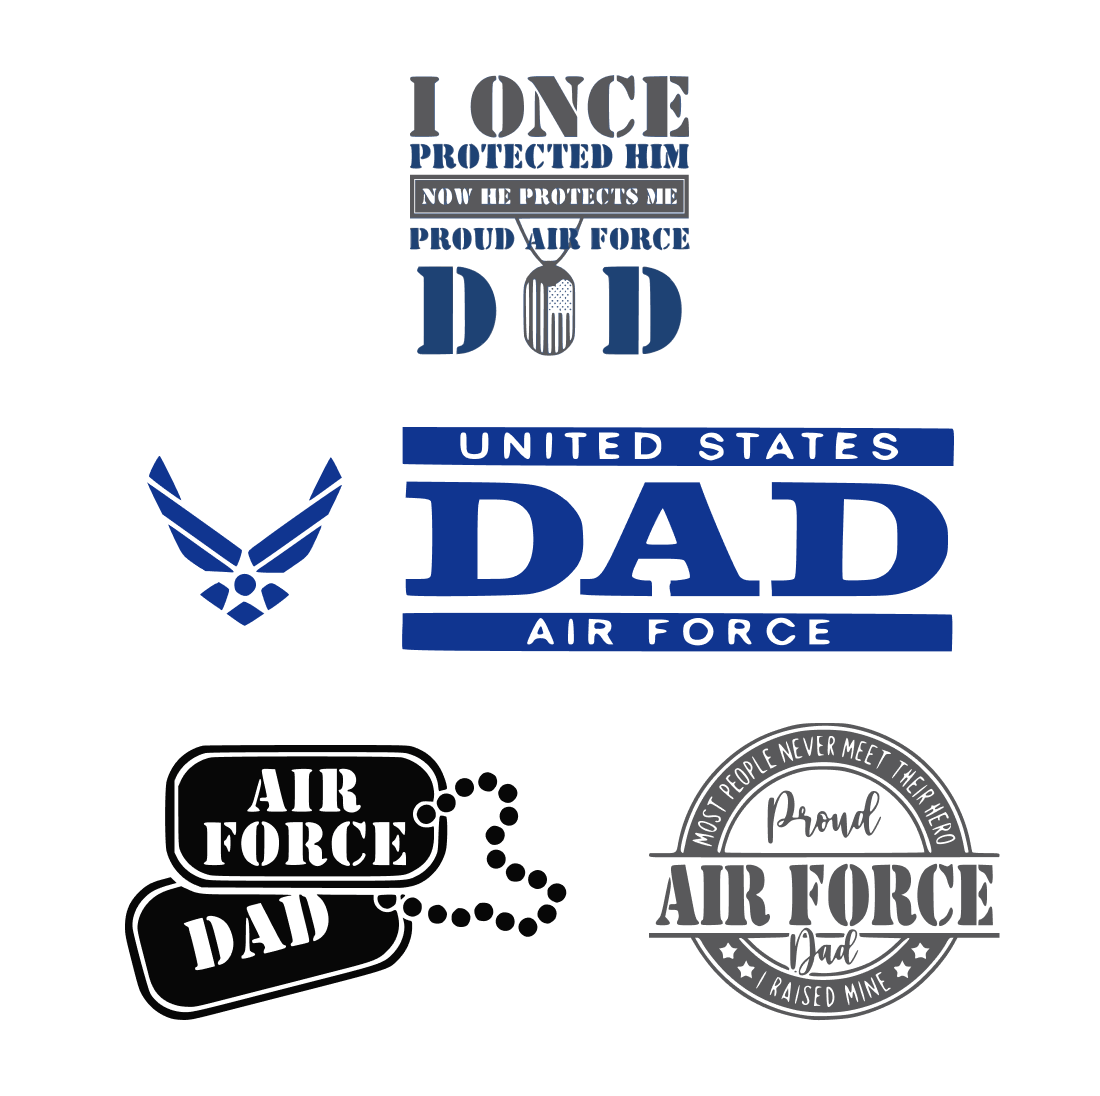 Inscription "I once protected him, now he protects me, proud Air Force dad" on the logos.